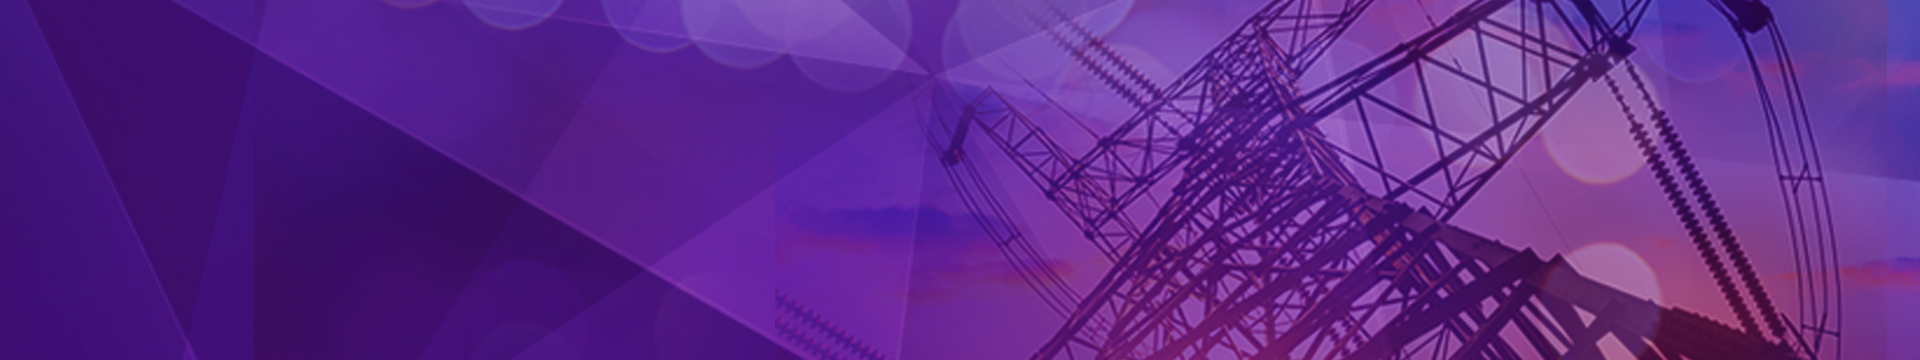 National Electrical Safety Code® (NESC®) Workshop: Changes for the Future Banner Image